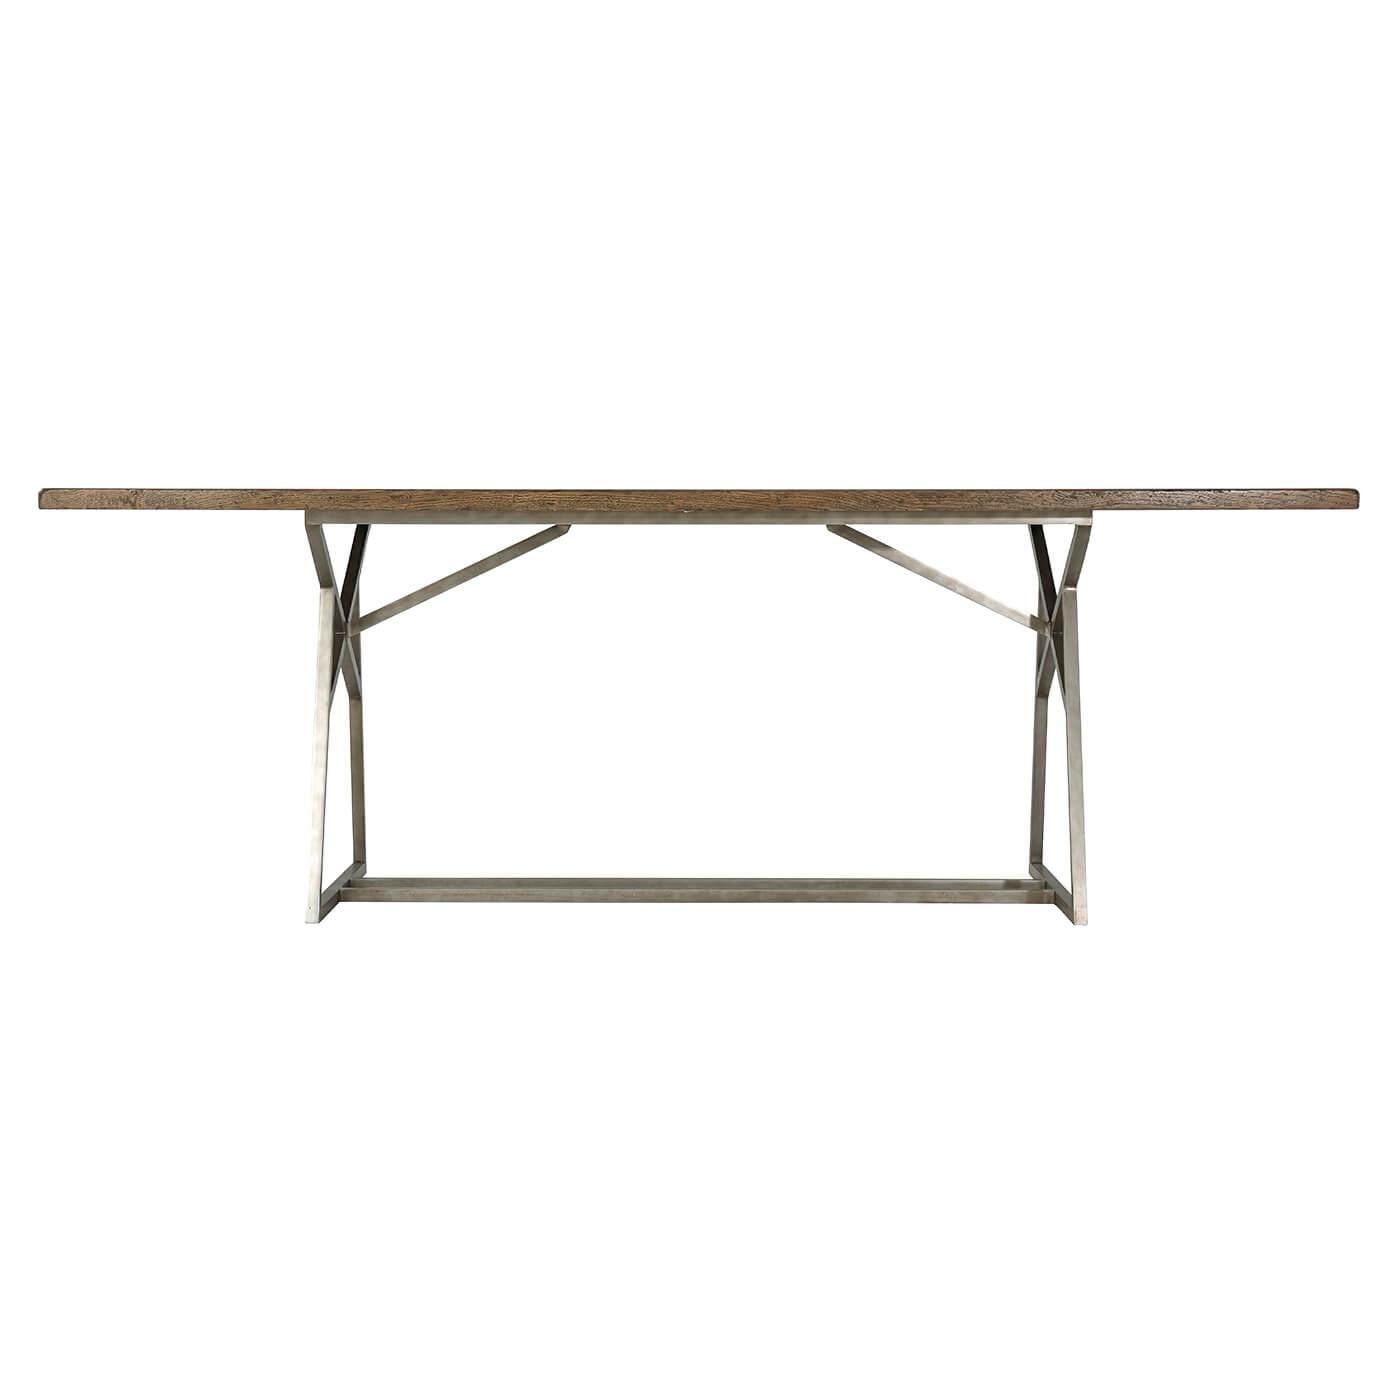 Organic Modern Rustic Parquetry Oak Dining Table